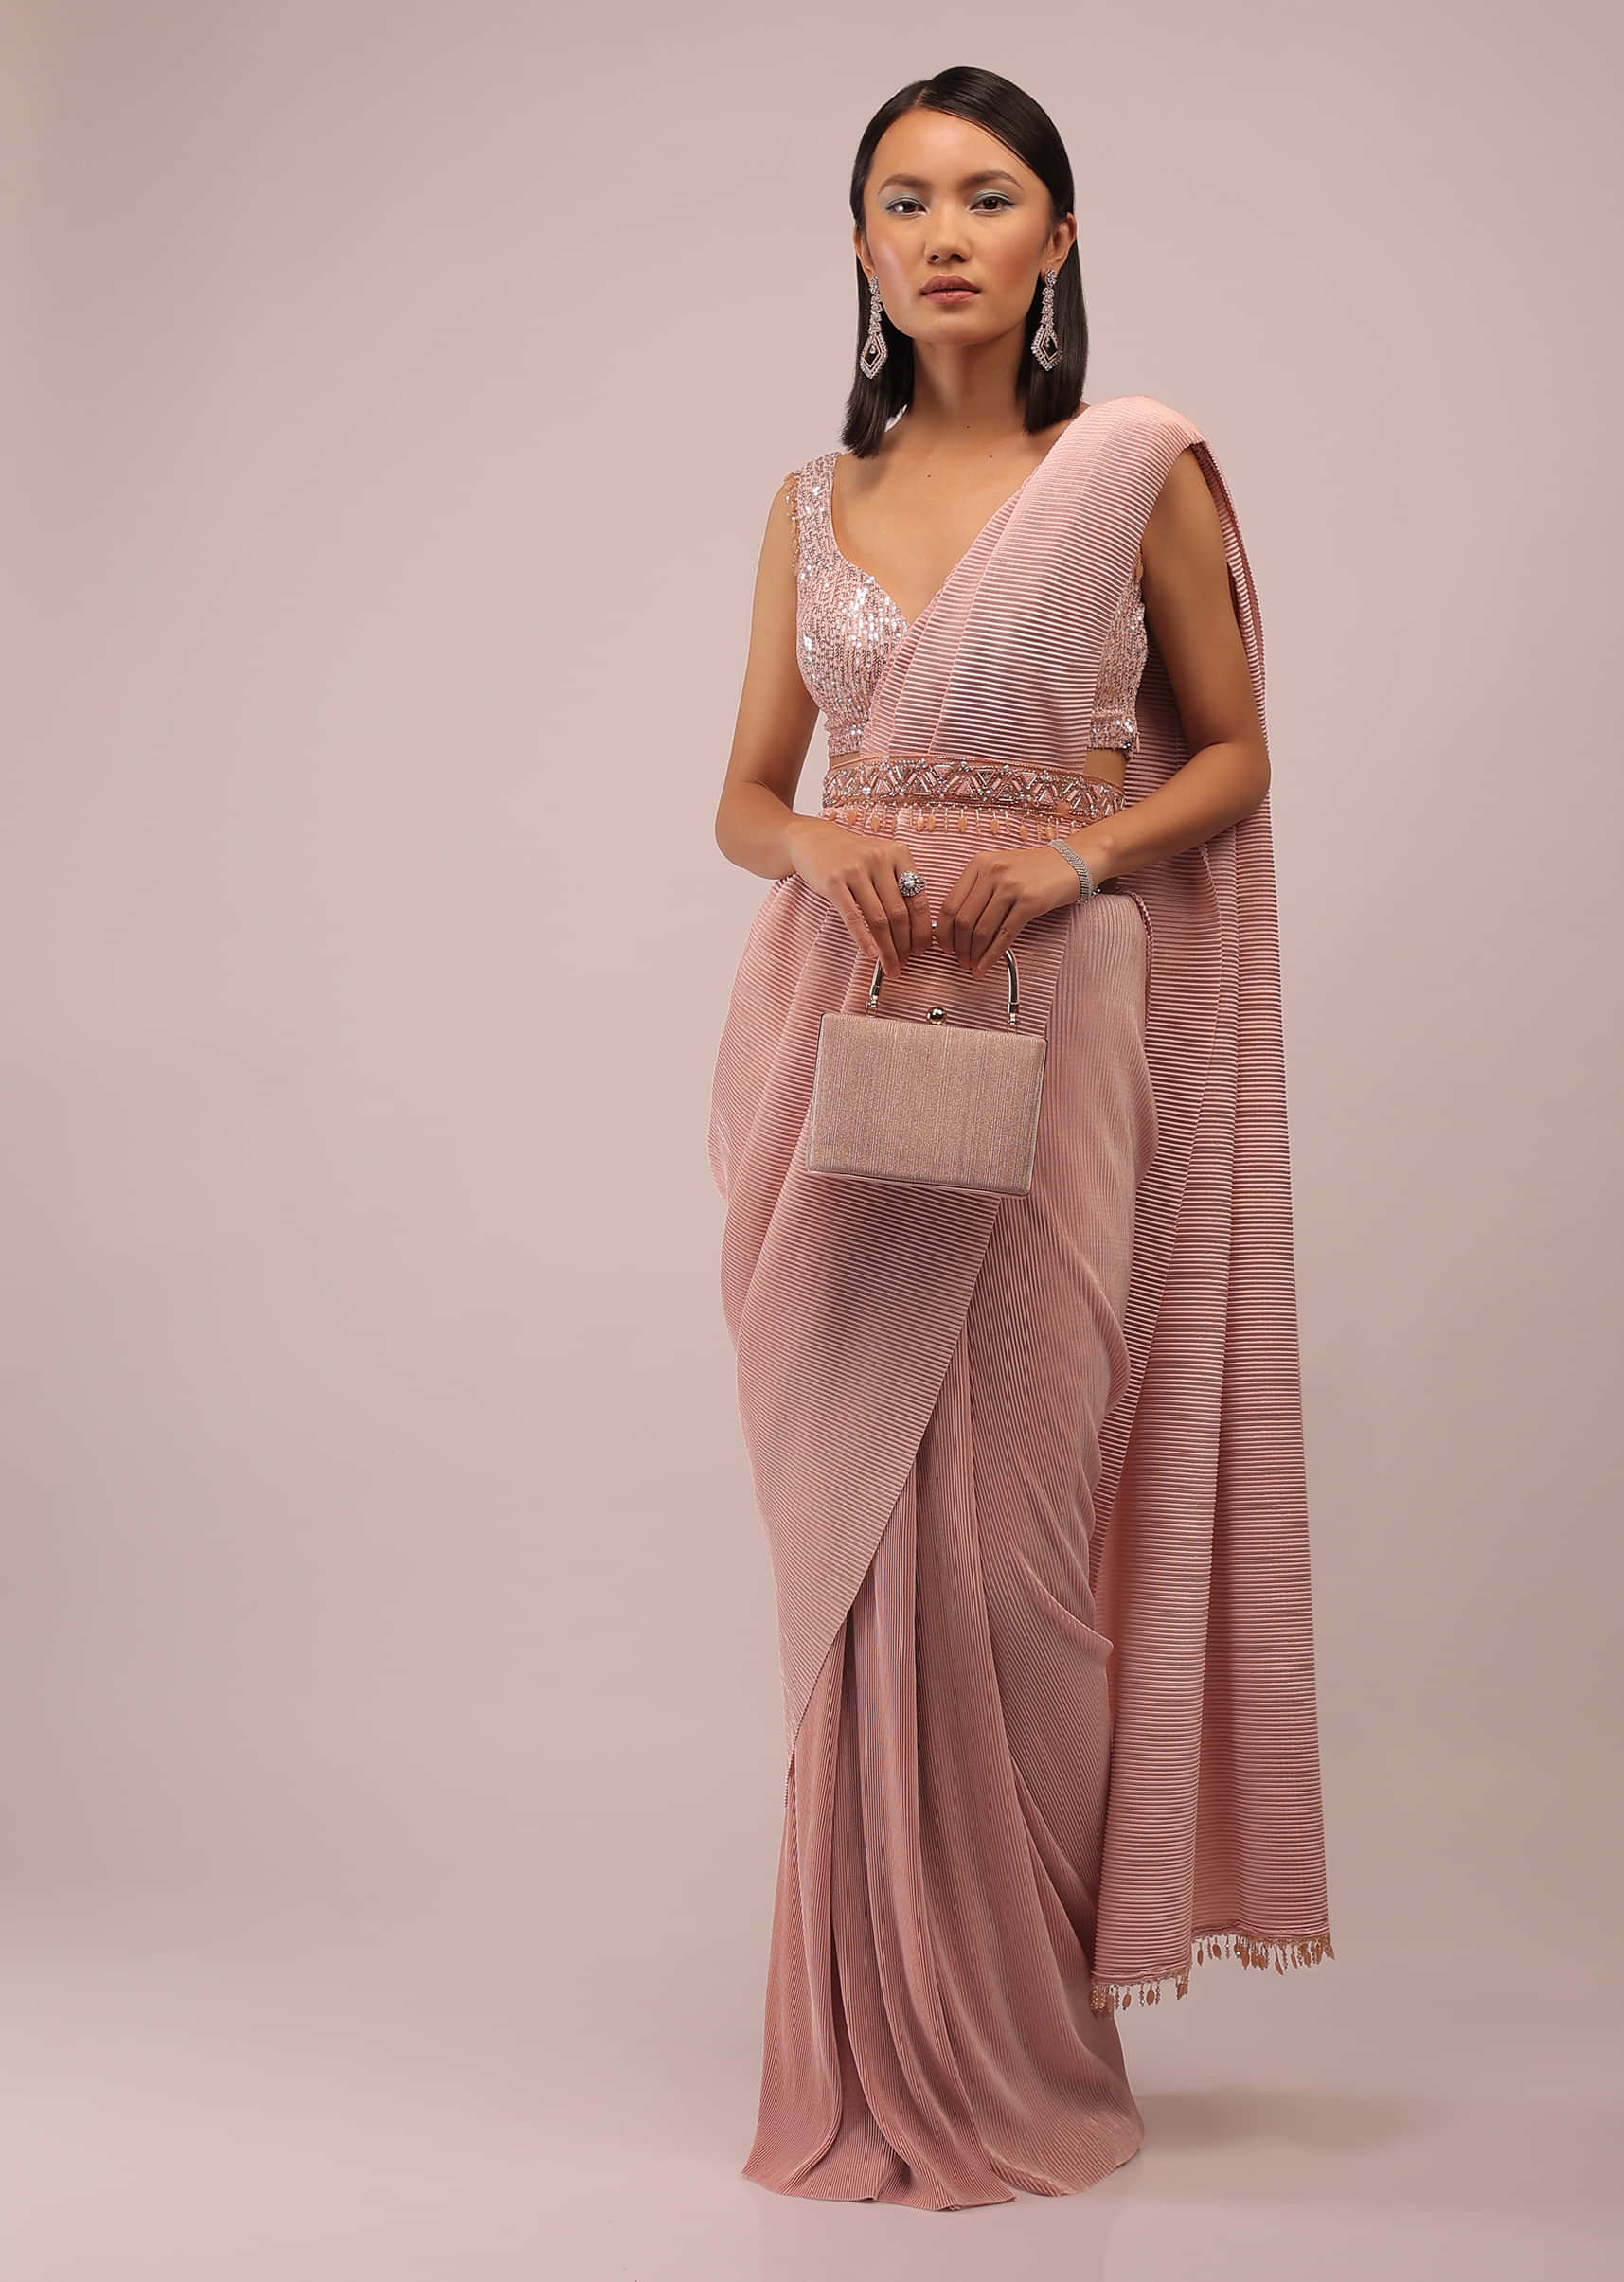 Peach Saree With A Crop Top Crafted In Net With Sequins Embroidery